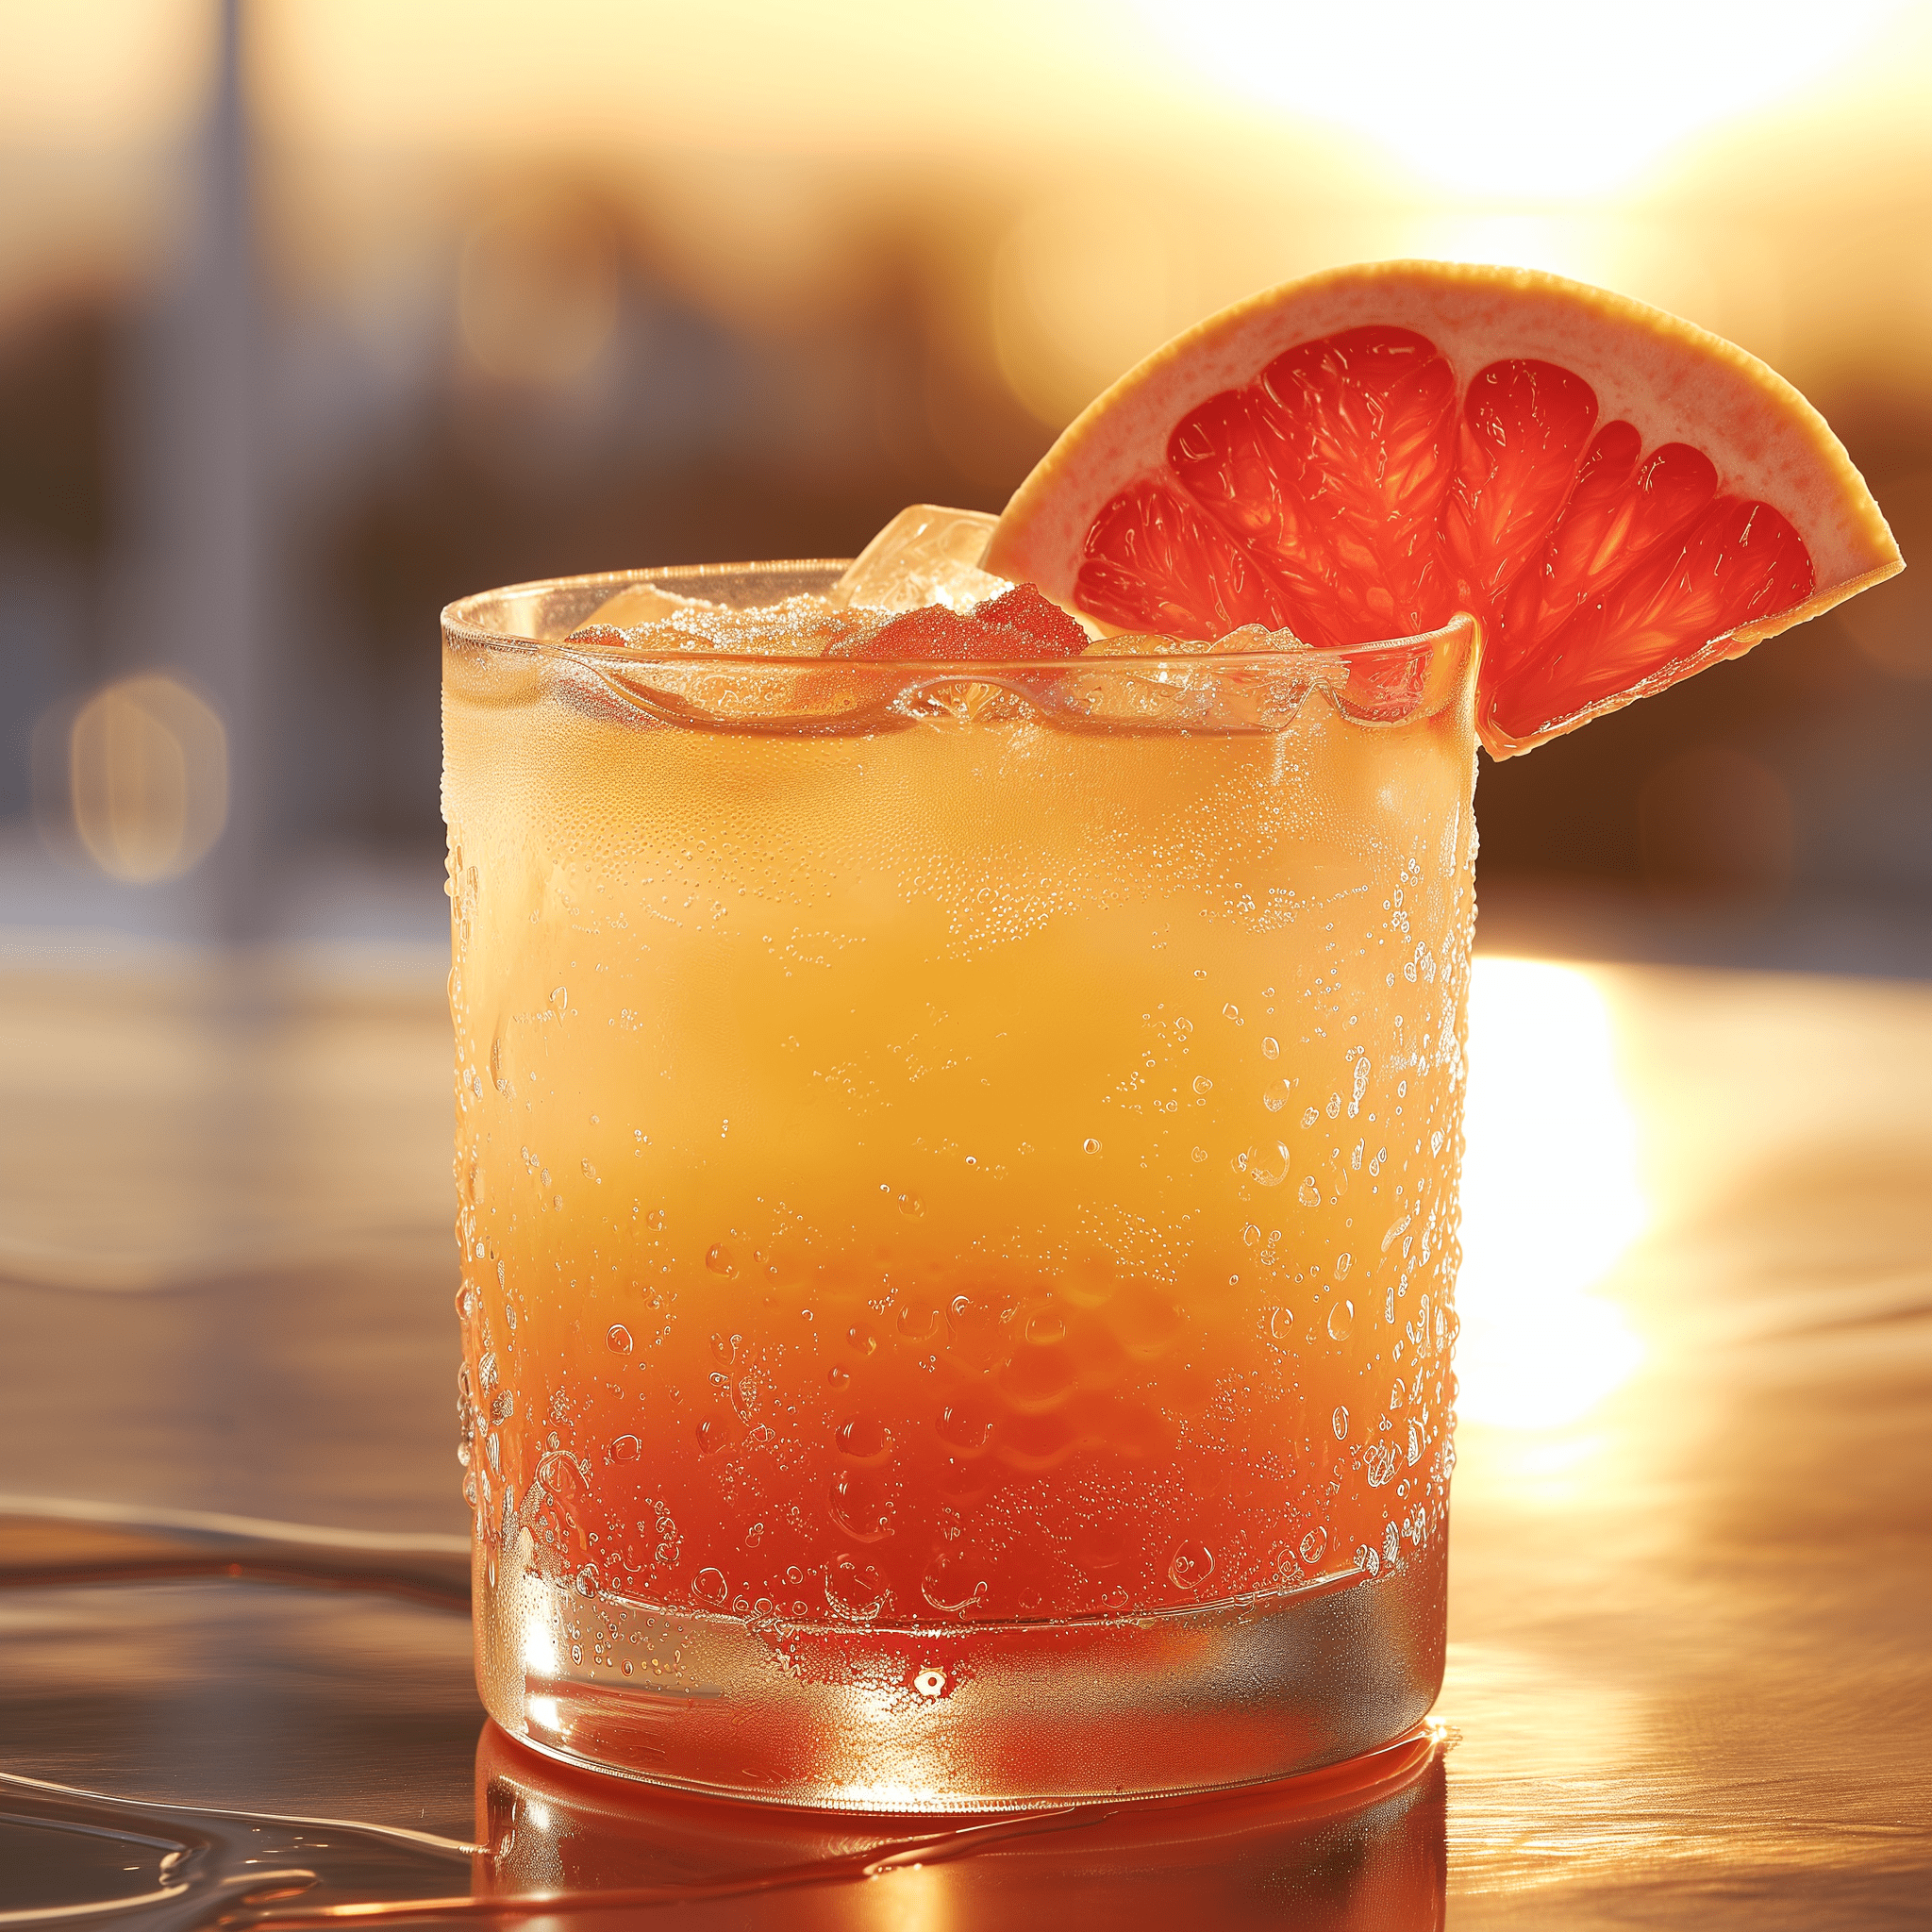 Rising Sun Cocktail Recipe - The Rising Sun cocktail offers a delightful fusion of sweet and sour flavors. The grapefruit juice provides a tangy punch, while the passion fruit syrup adds a luscious sweetness. The vodka's presence is smooth, making the drink moderately strong but not overpowering.